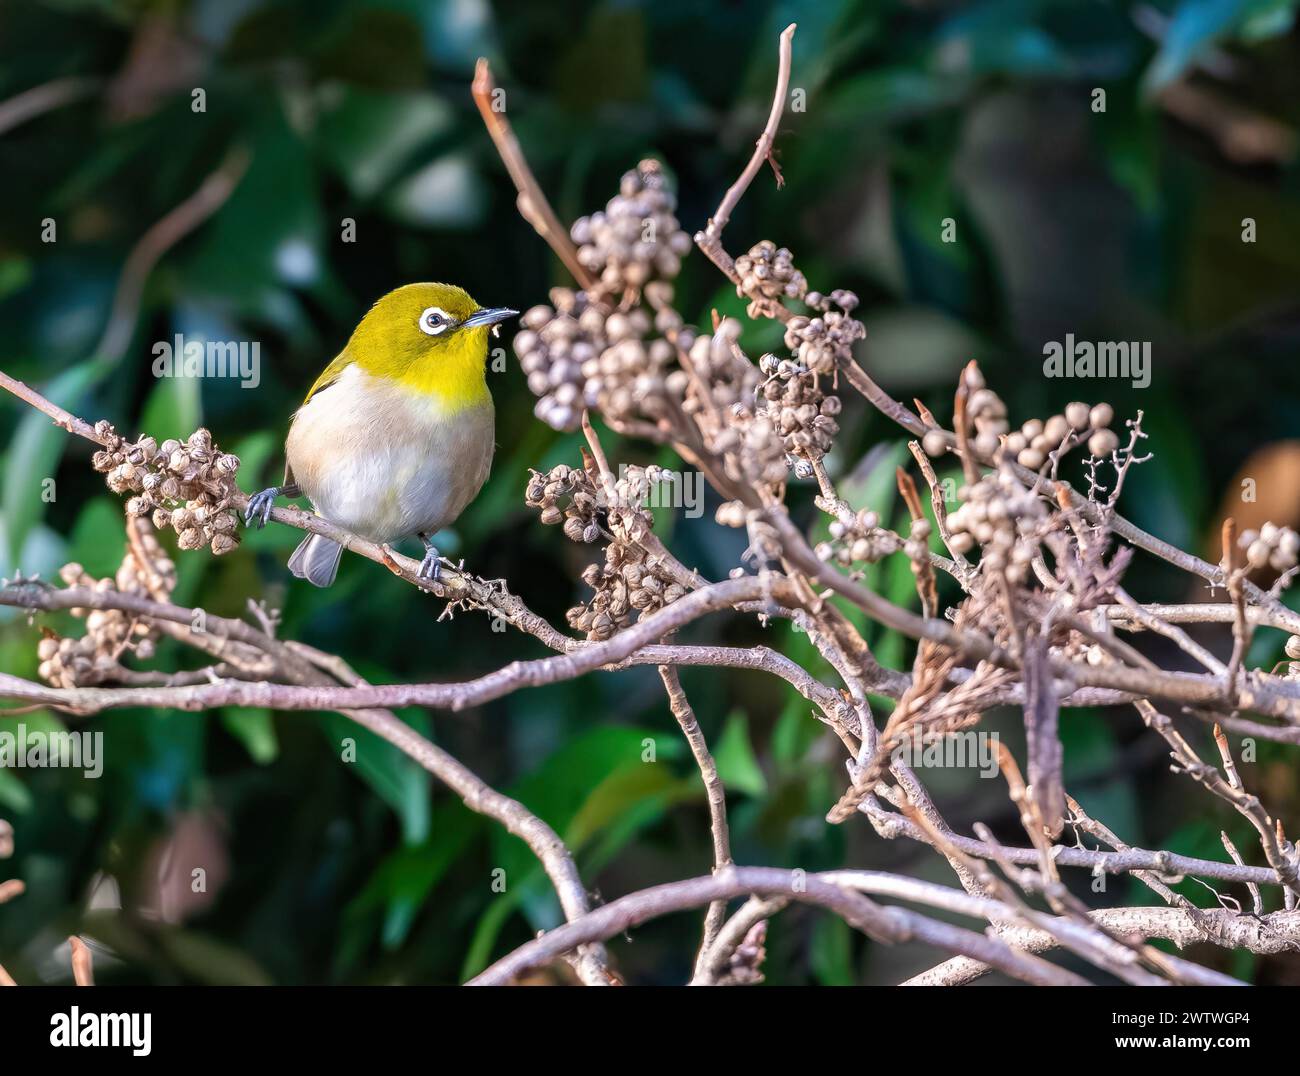 A Warbling White-eye (Zosterops japonicus) feeding on seeds. Tokyo, Japan. Stock Photo